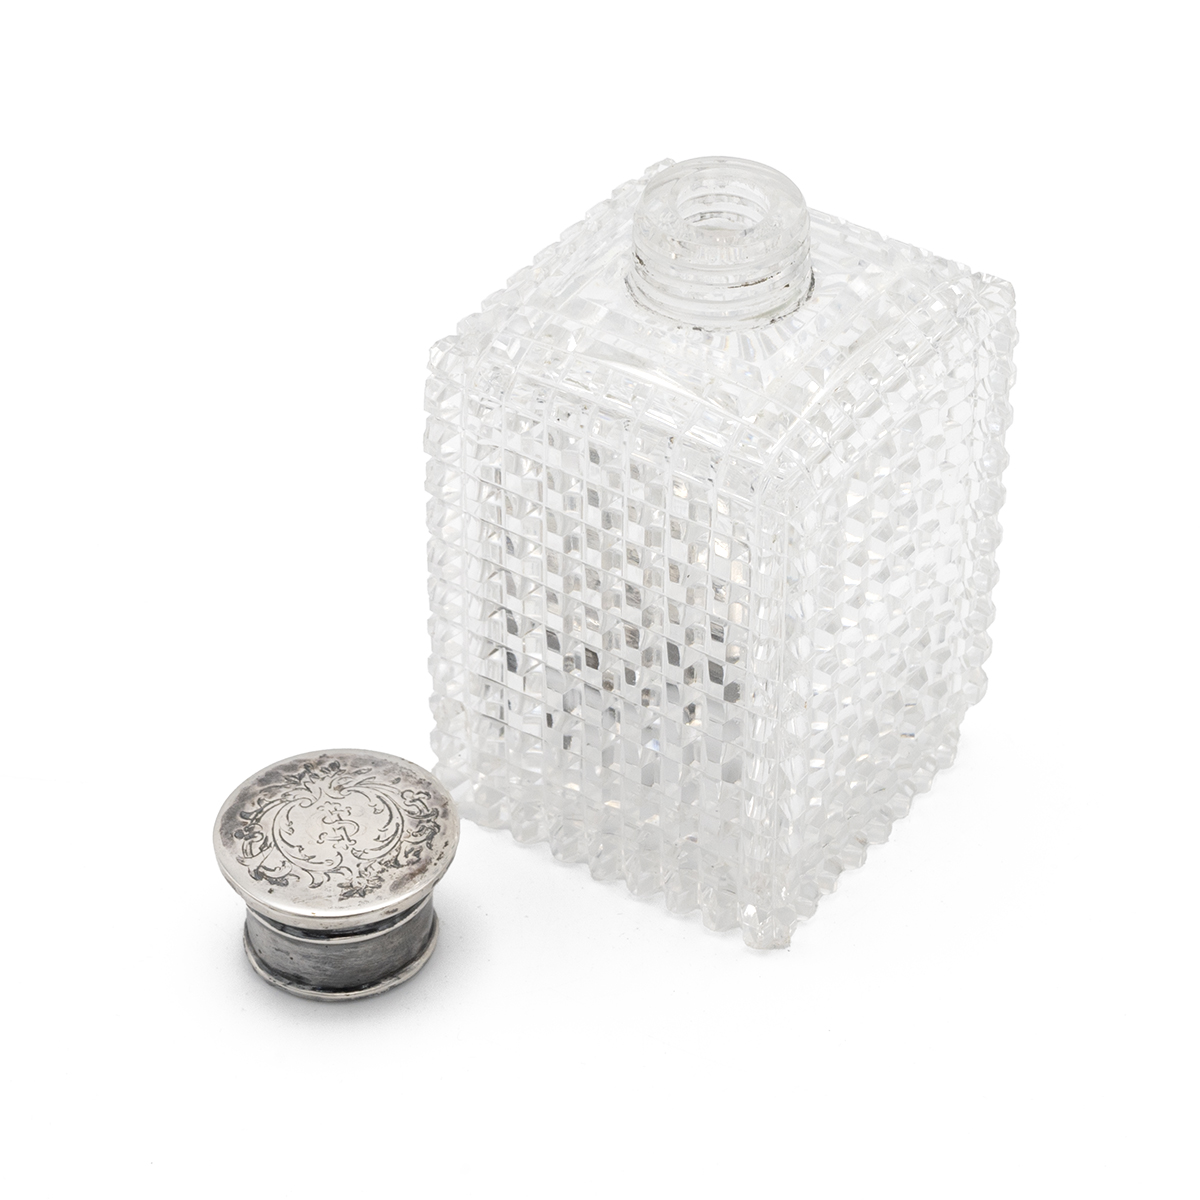 Cut glass cologne flask with silver screw top of square form with diamond cut pattern. H 9.5cm. - Image 3 of 3